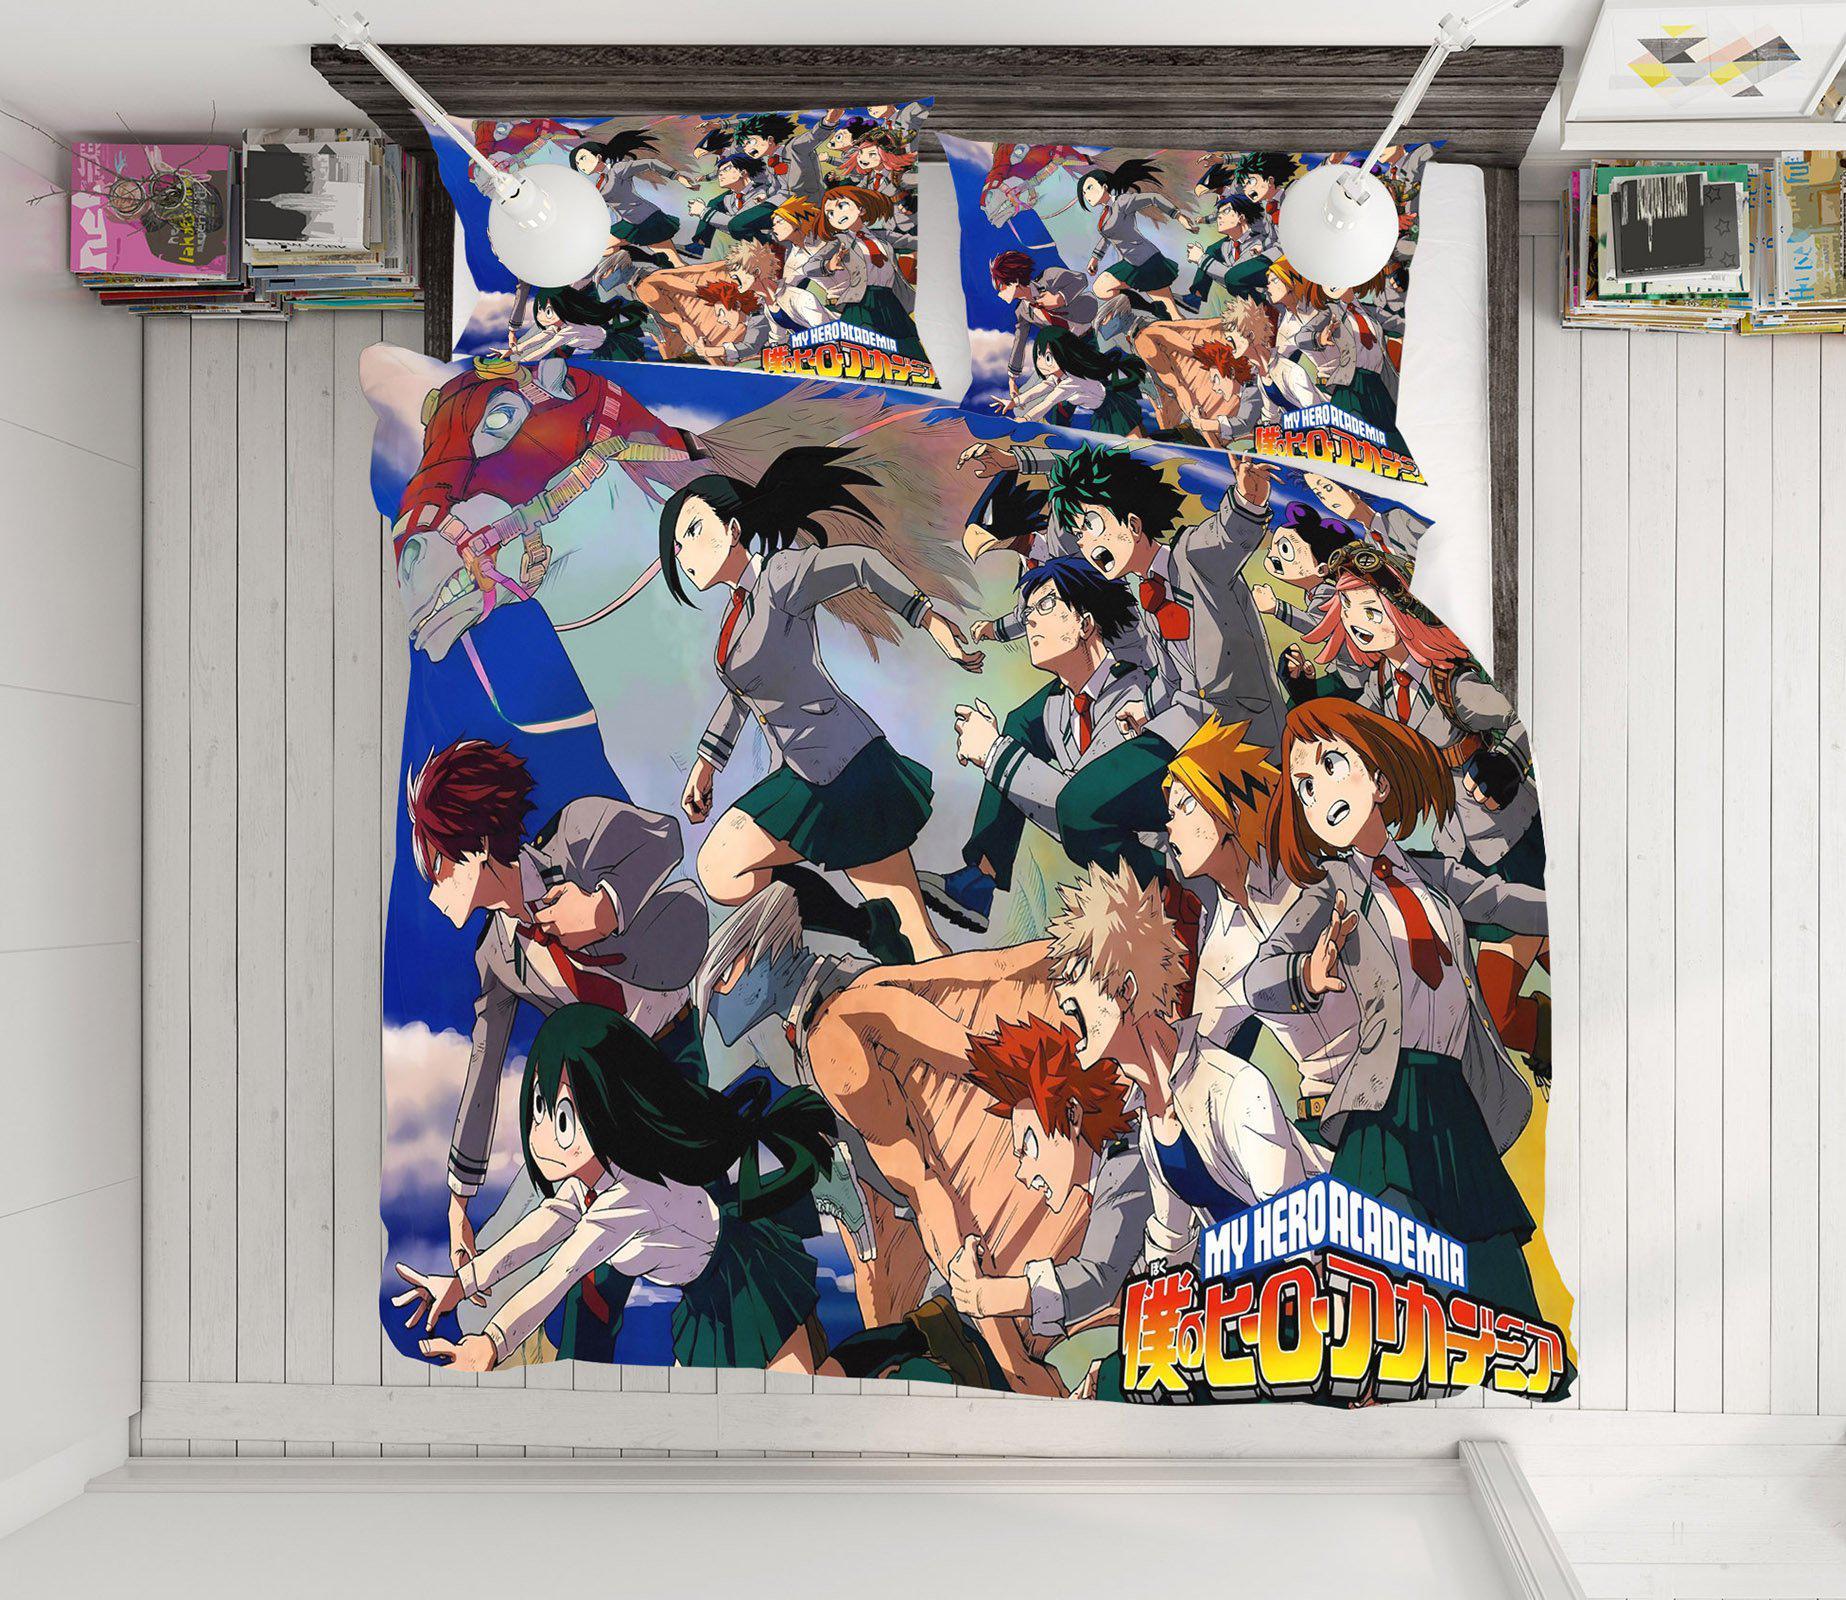 3D Bed Pillowcases Quilt My Hero Academia 21087 Anime Quilt Cover Set Bedding Set Pillowcases 3D Bed Pillowcases Quilt Duvet cover